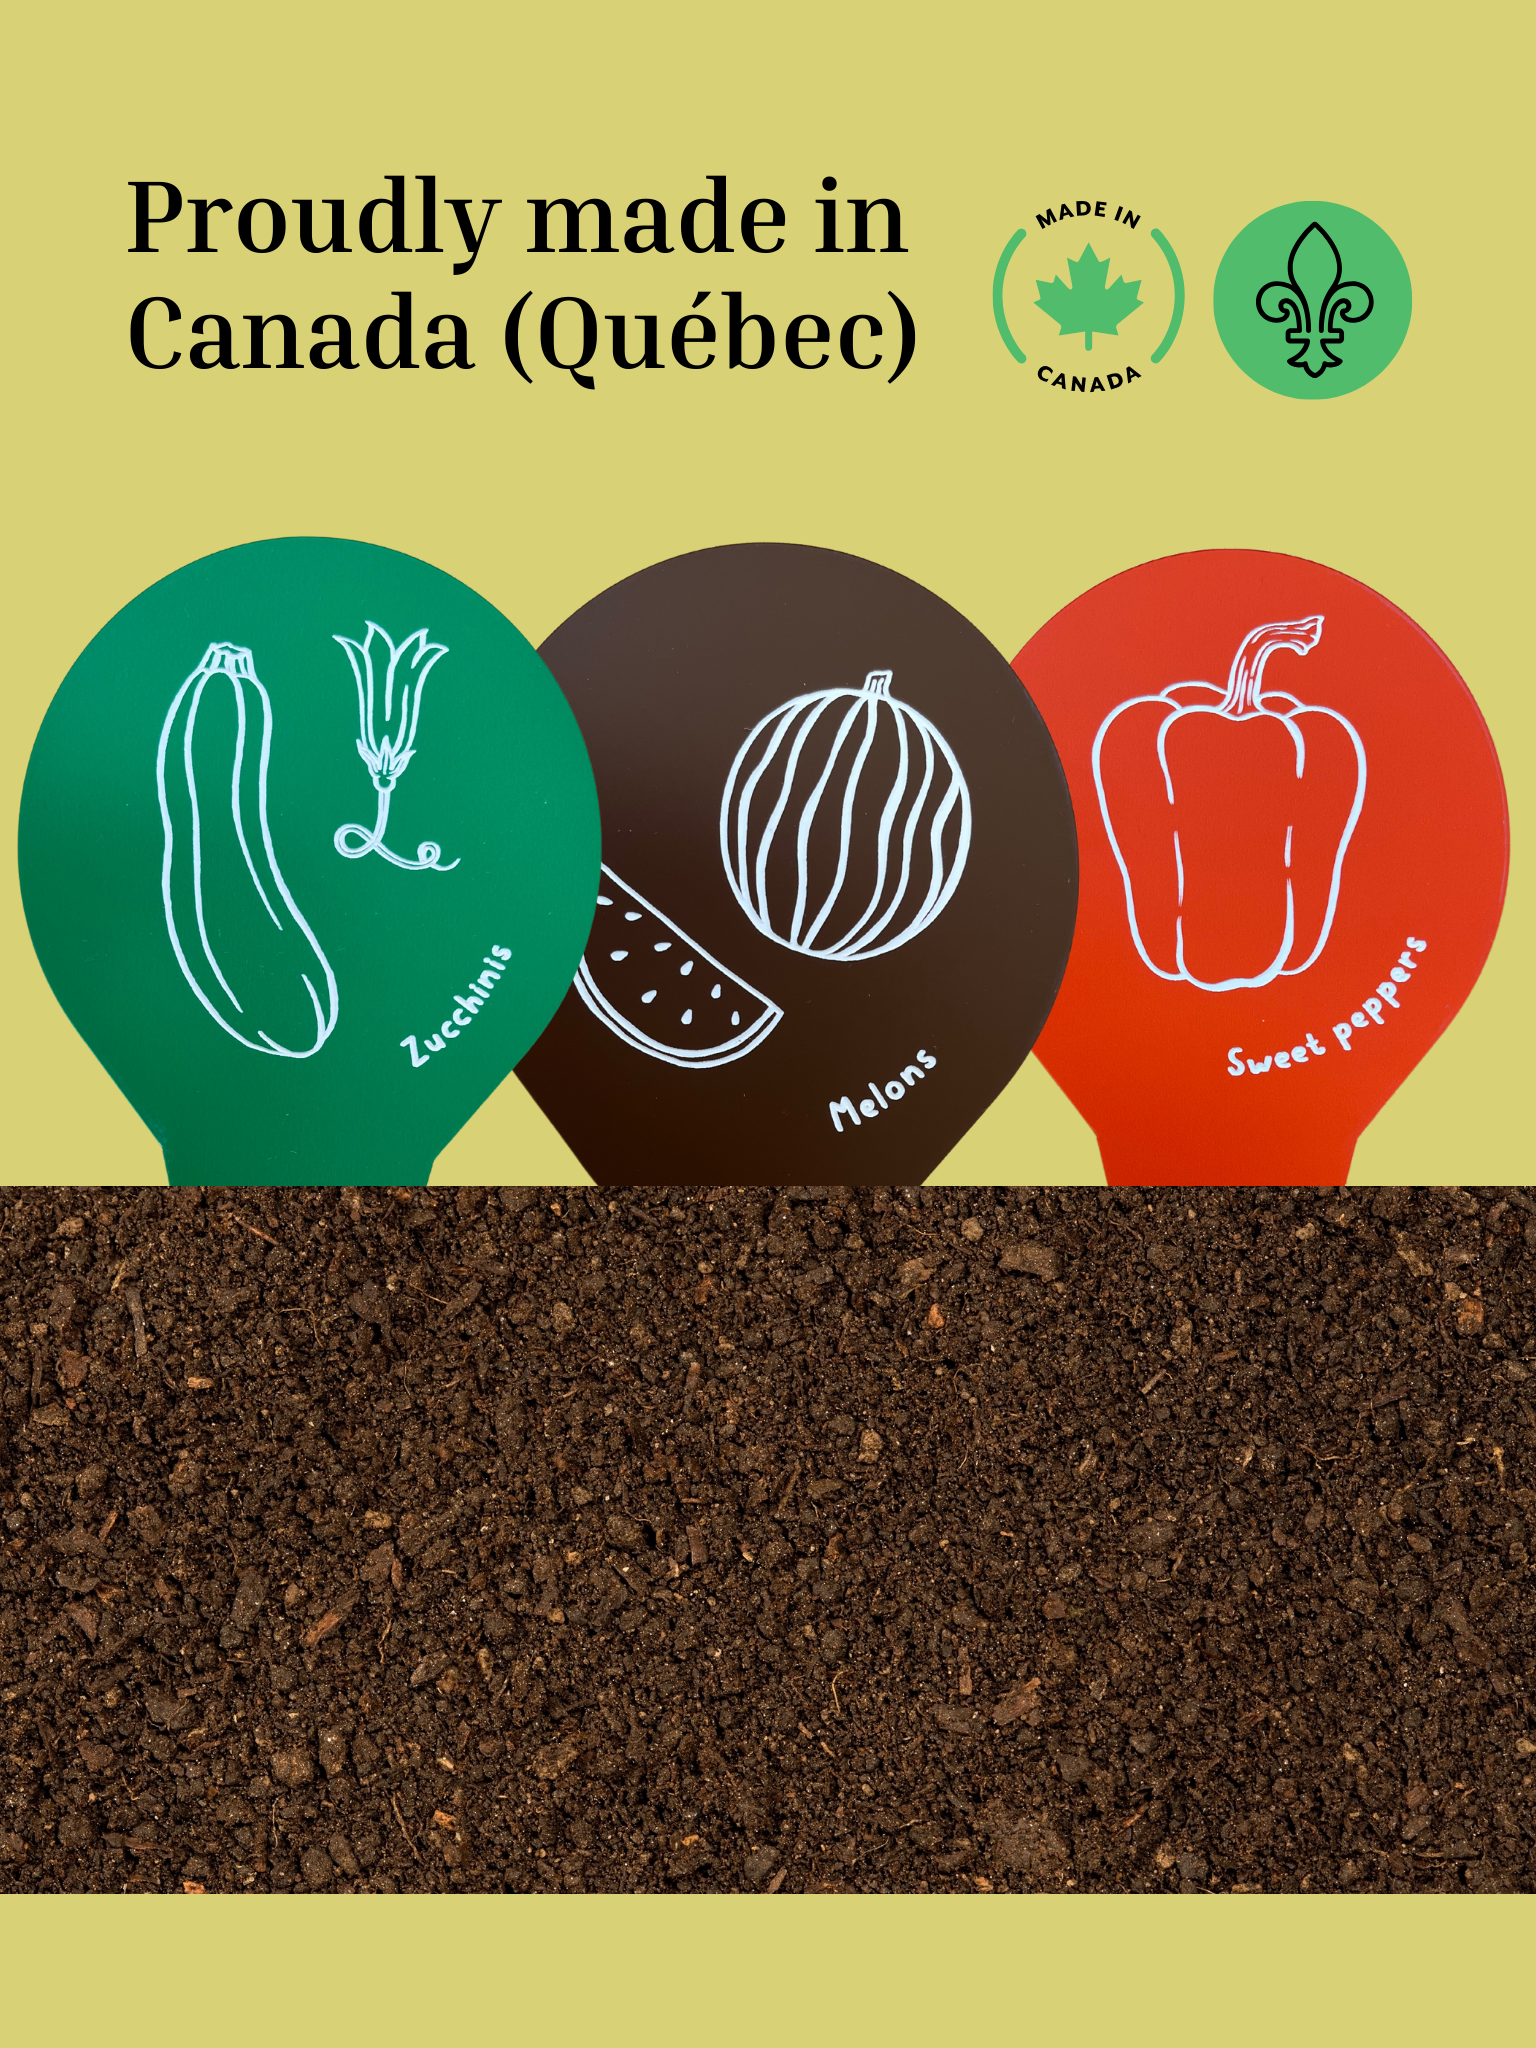 Garden Markers, Plant Labels, Fruits and Vegetables Illustration, made in Quebec, Canada